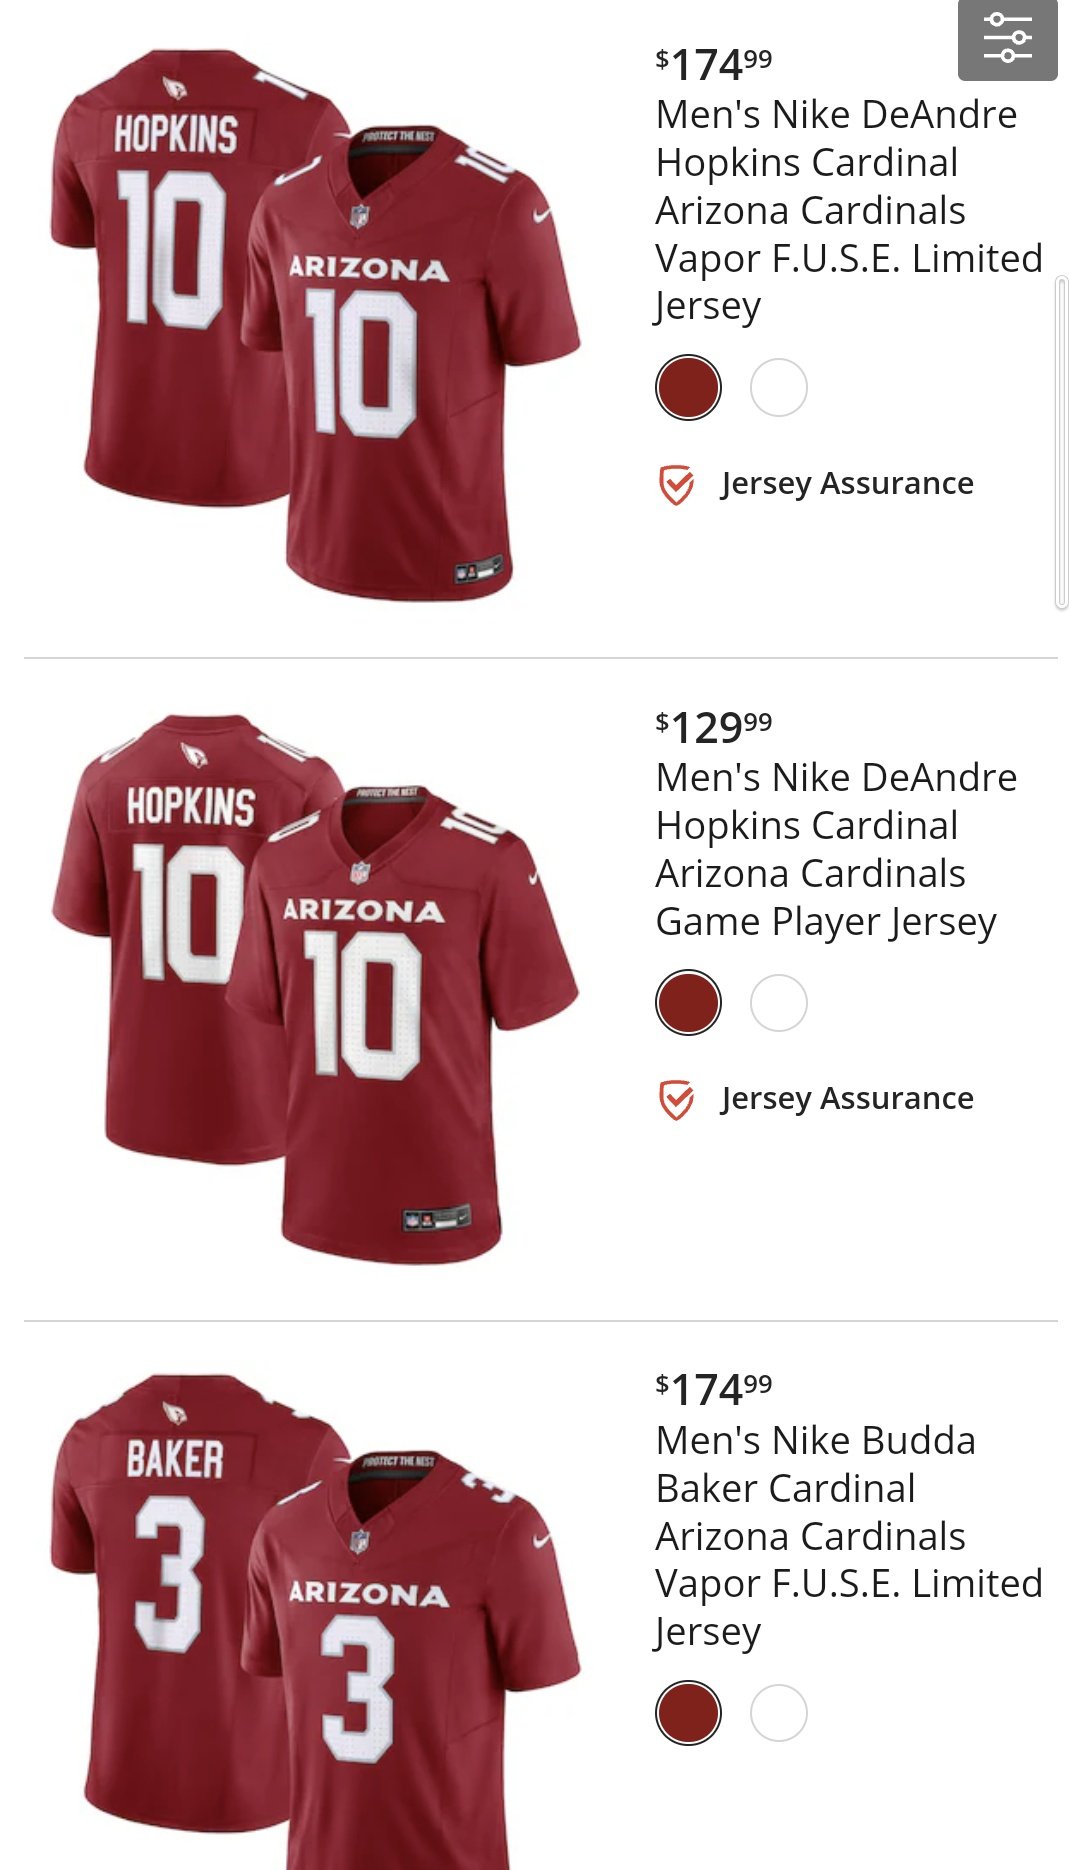 Curtis Leung on X: On the #AZCardinals team shop, only two players' jerseys  have the 'Free Jersey Assurance': DeAndre Hopkins and Isaiah Simmons Budda  Baker's jersey does not have the assurance  /